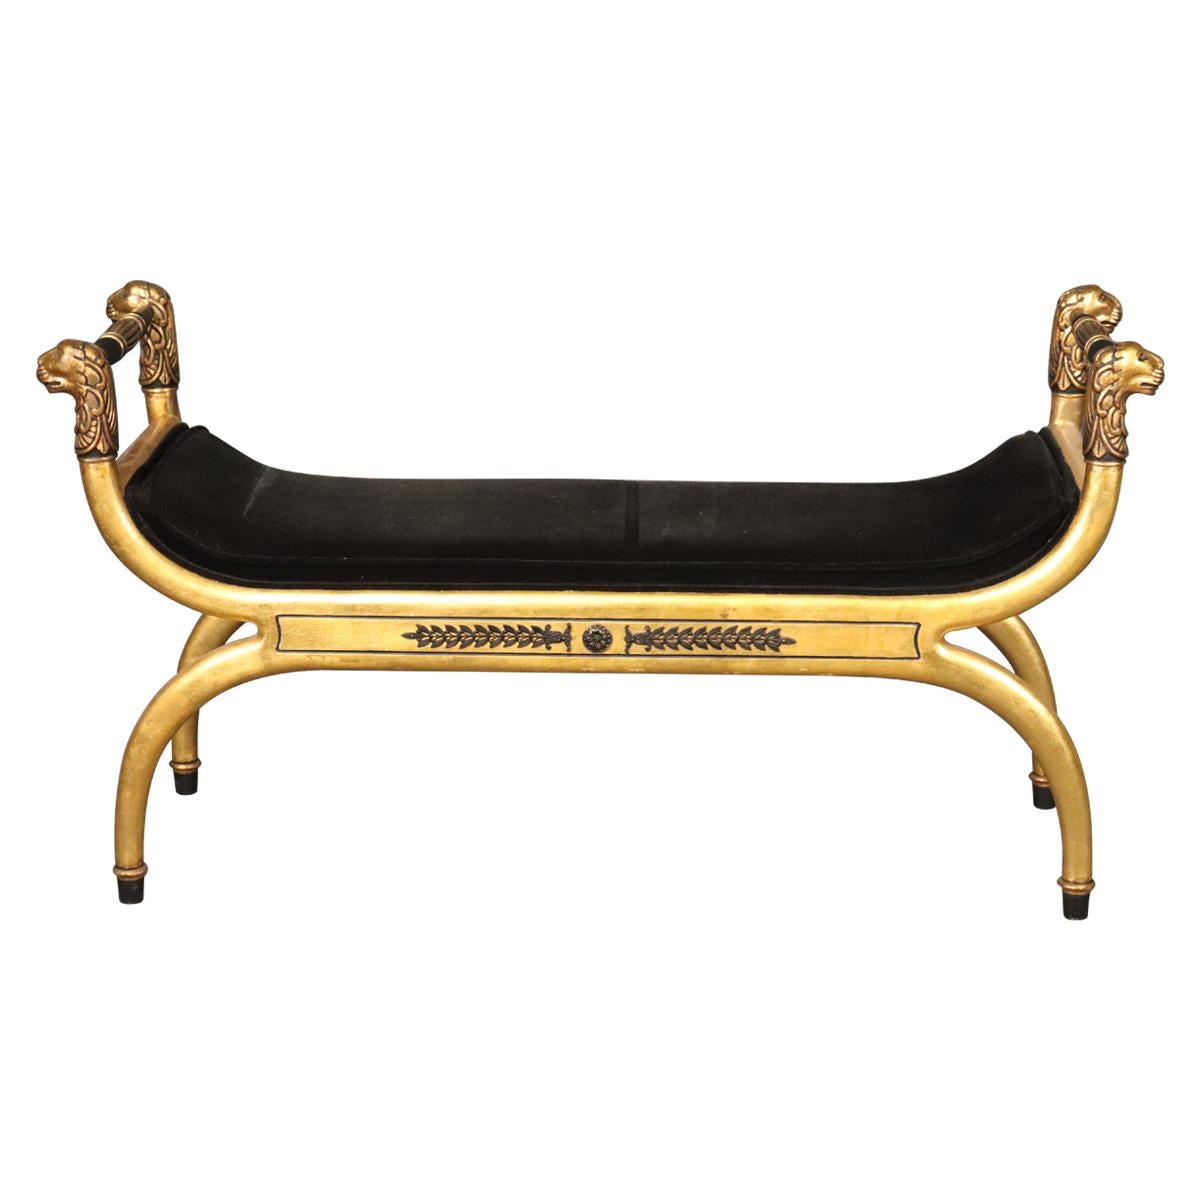 Fine Quality Genuine Gold Giltwood French or Hollywood Regency Window Bench